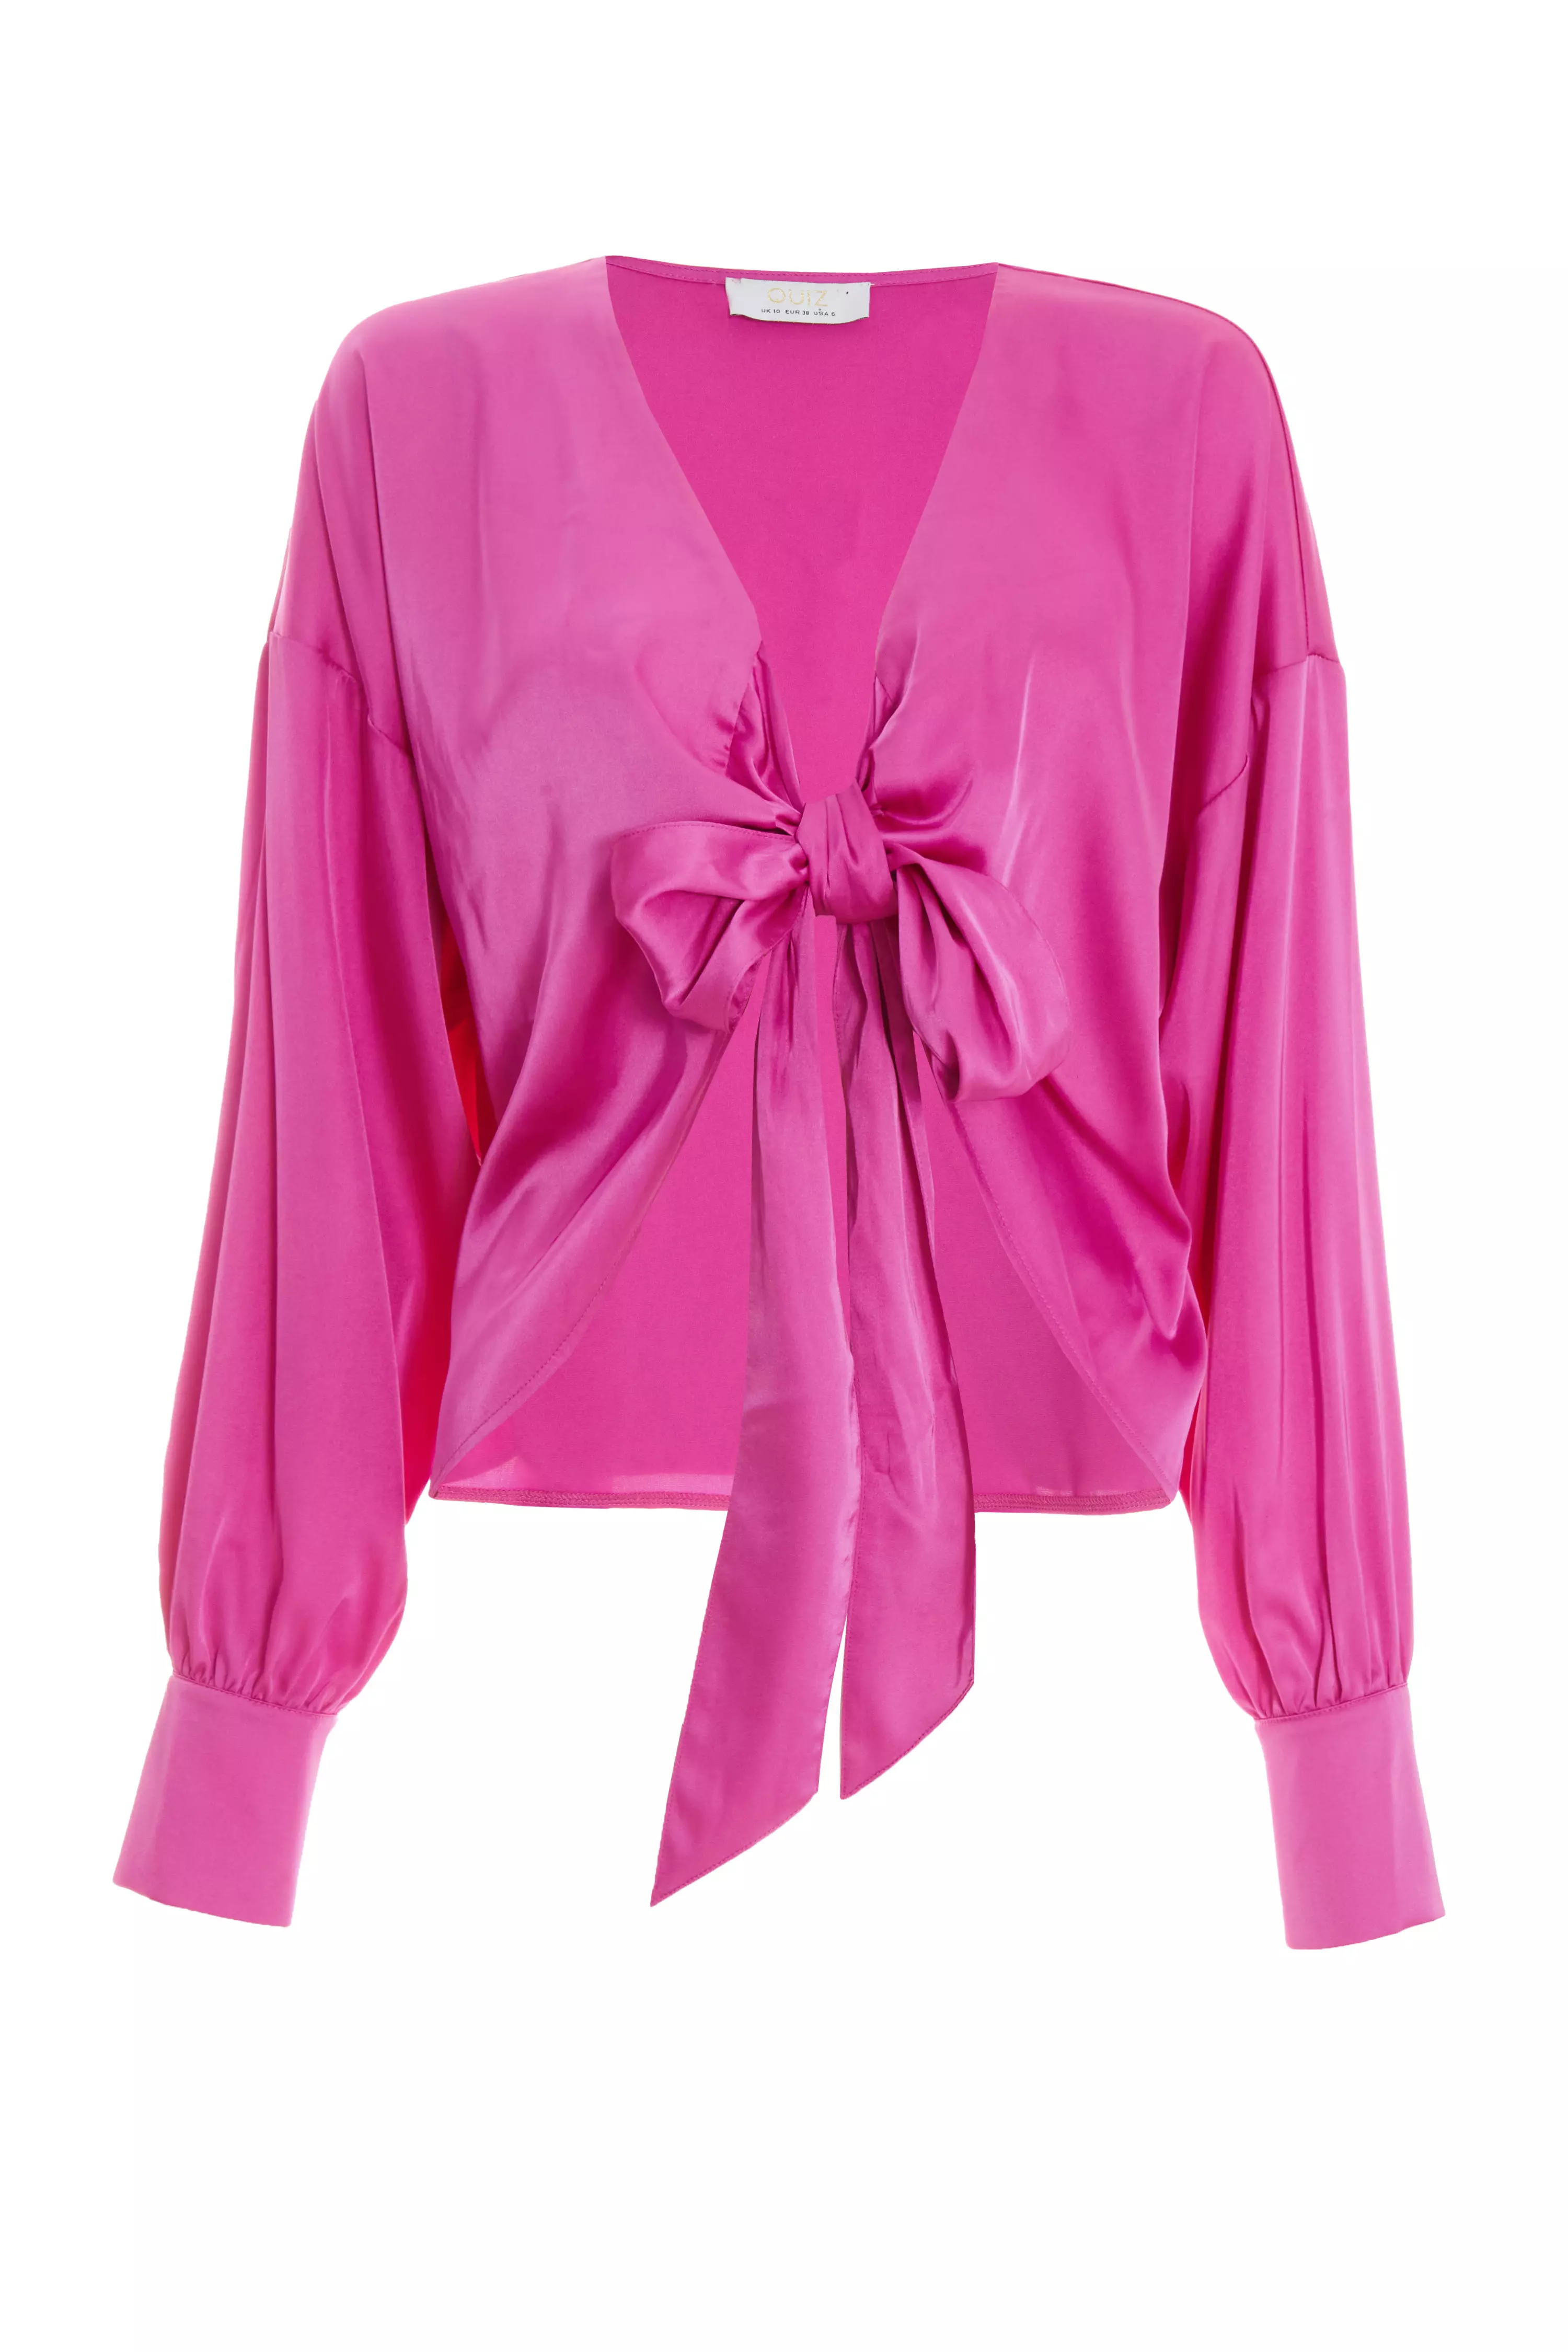 Pink Satin Tie Cropped Blouse - QUIZ Clothing